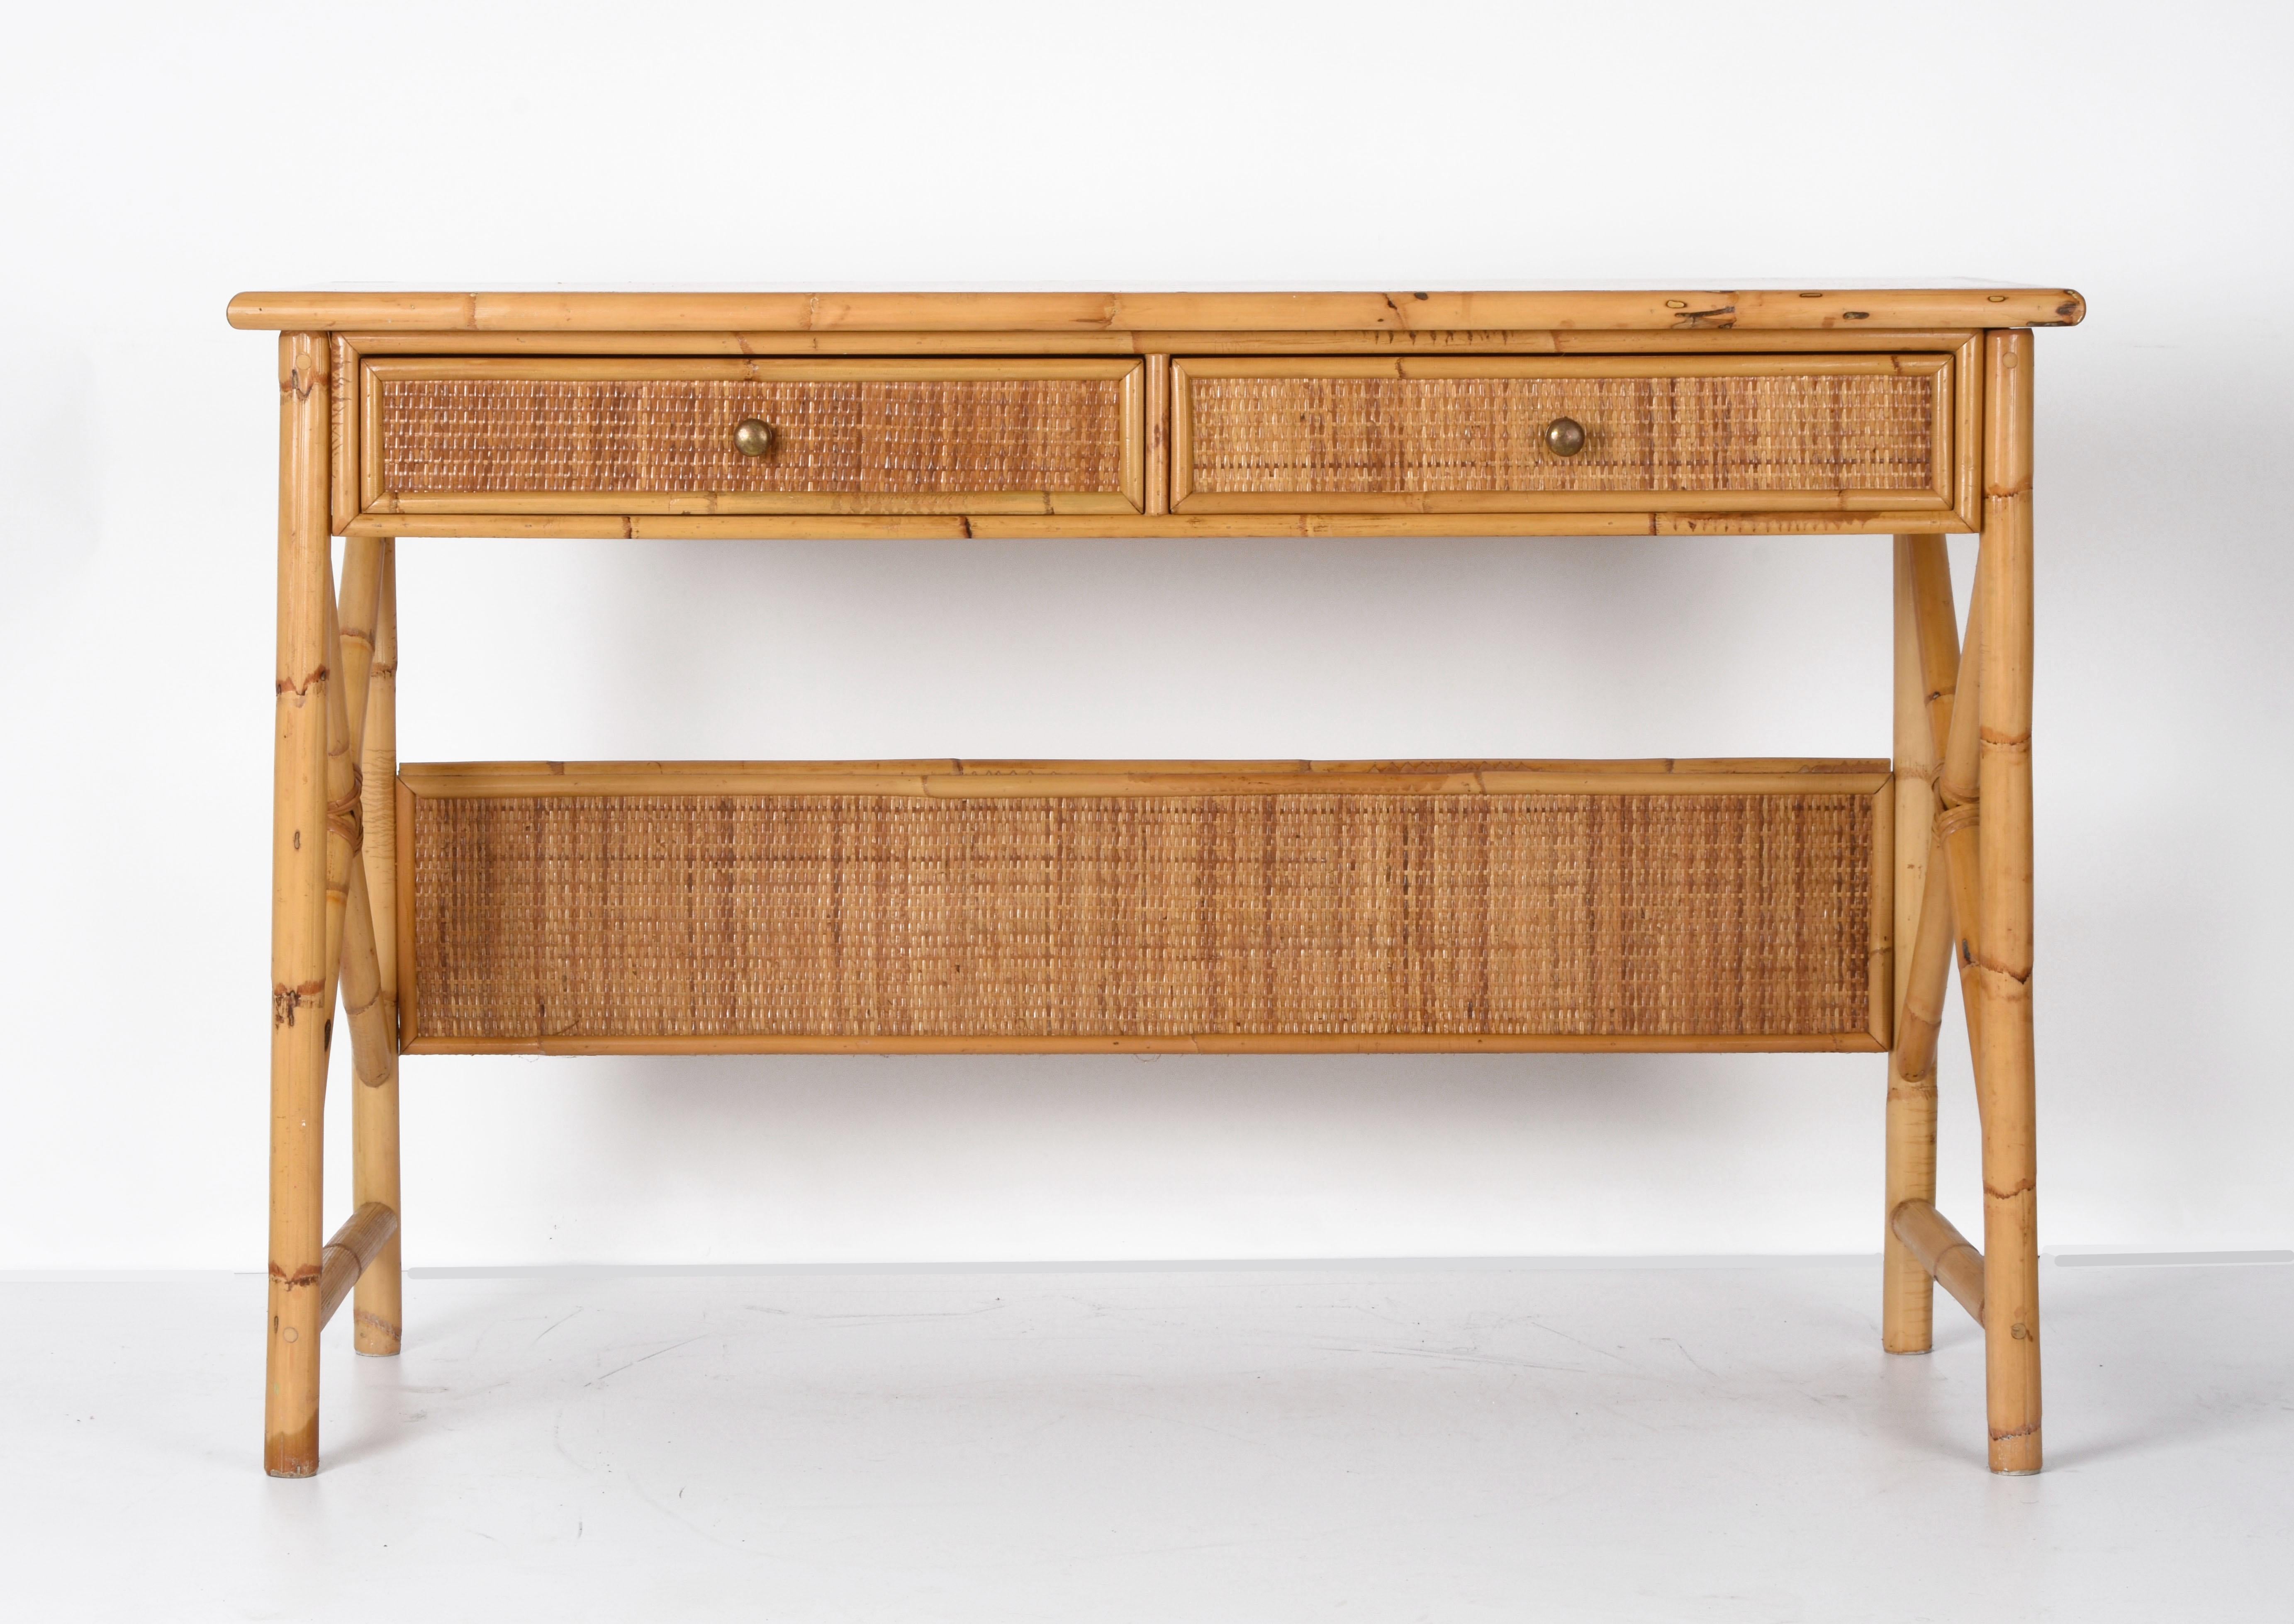 Amazing bamboo and wicker desk with mid century ash wood top with drawers. This wonderful piece was designed in Italy during the 1980s.

This desk is unique because of the materials, ash. bamboo and rattan are perfectly combined. The main